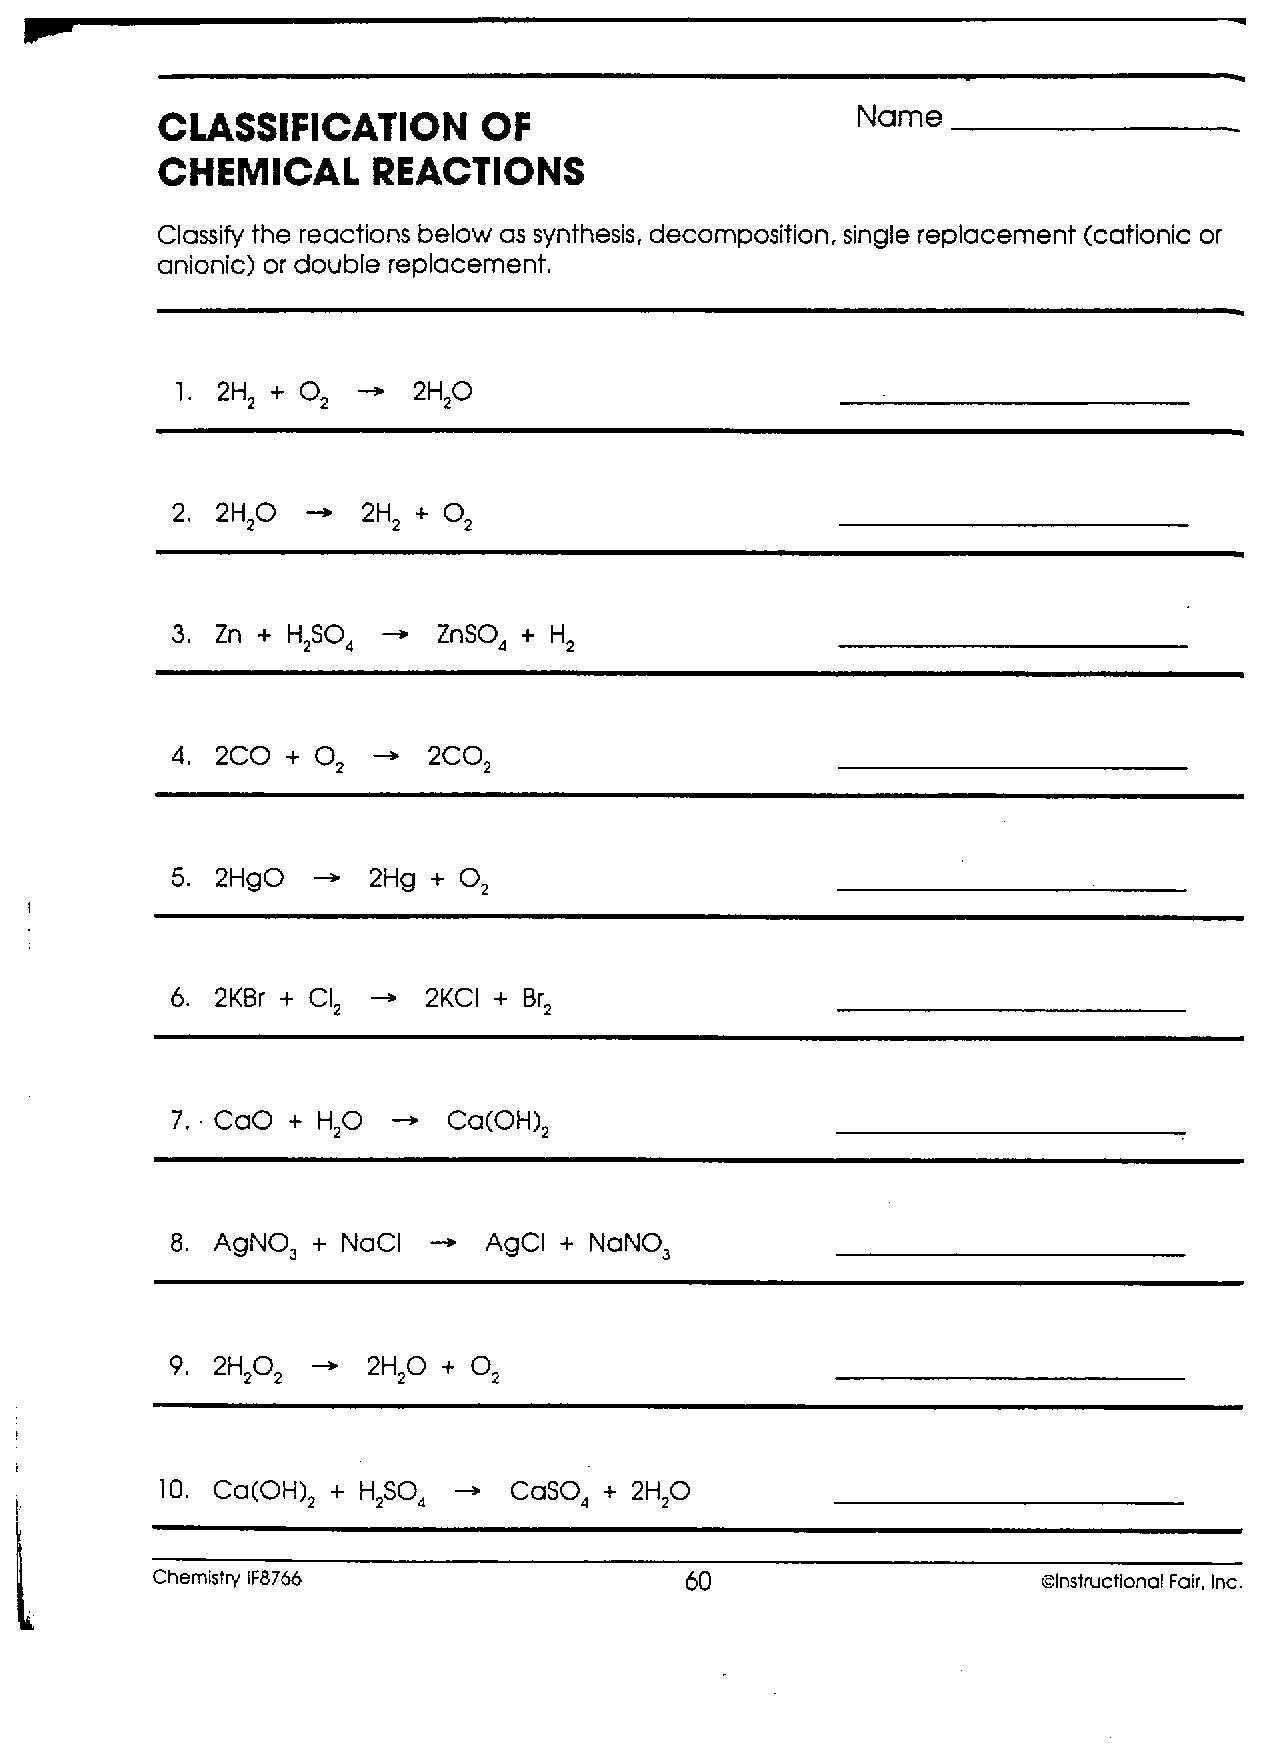 Classification Of Chemical Reactions Worksheet as Well as Classification Chemical Reactions Worksheet Answers New Dc Heath